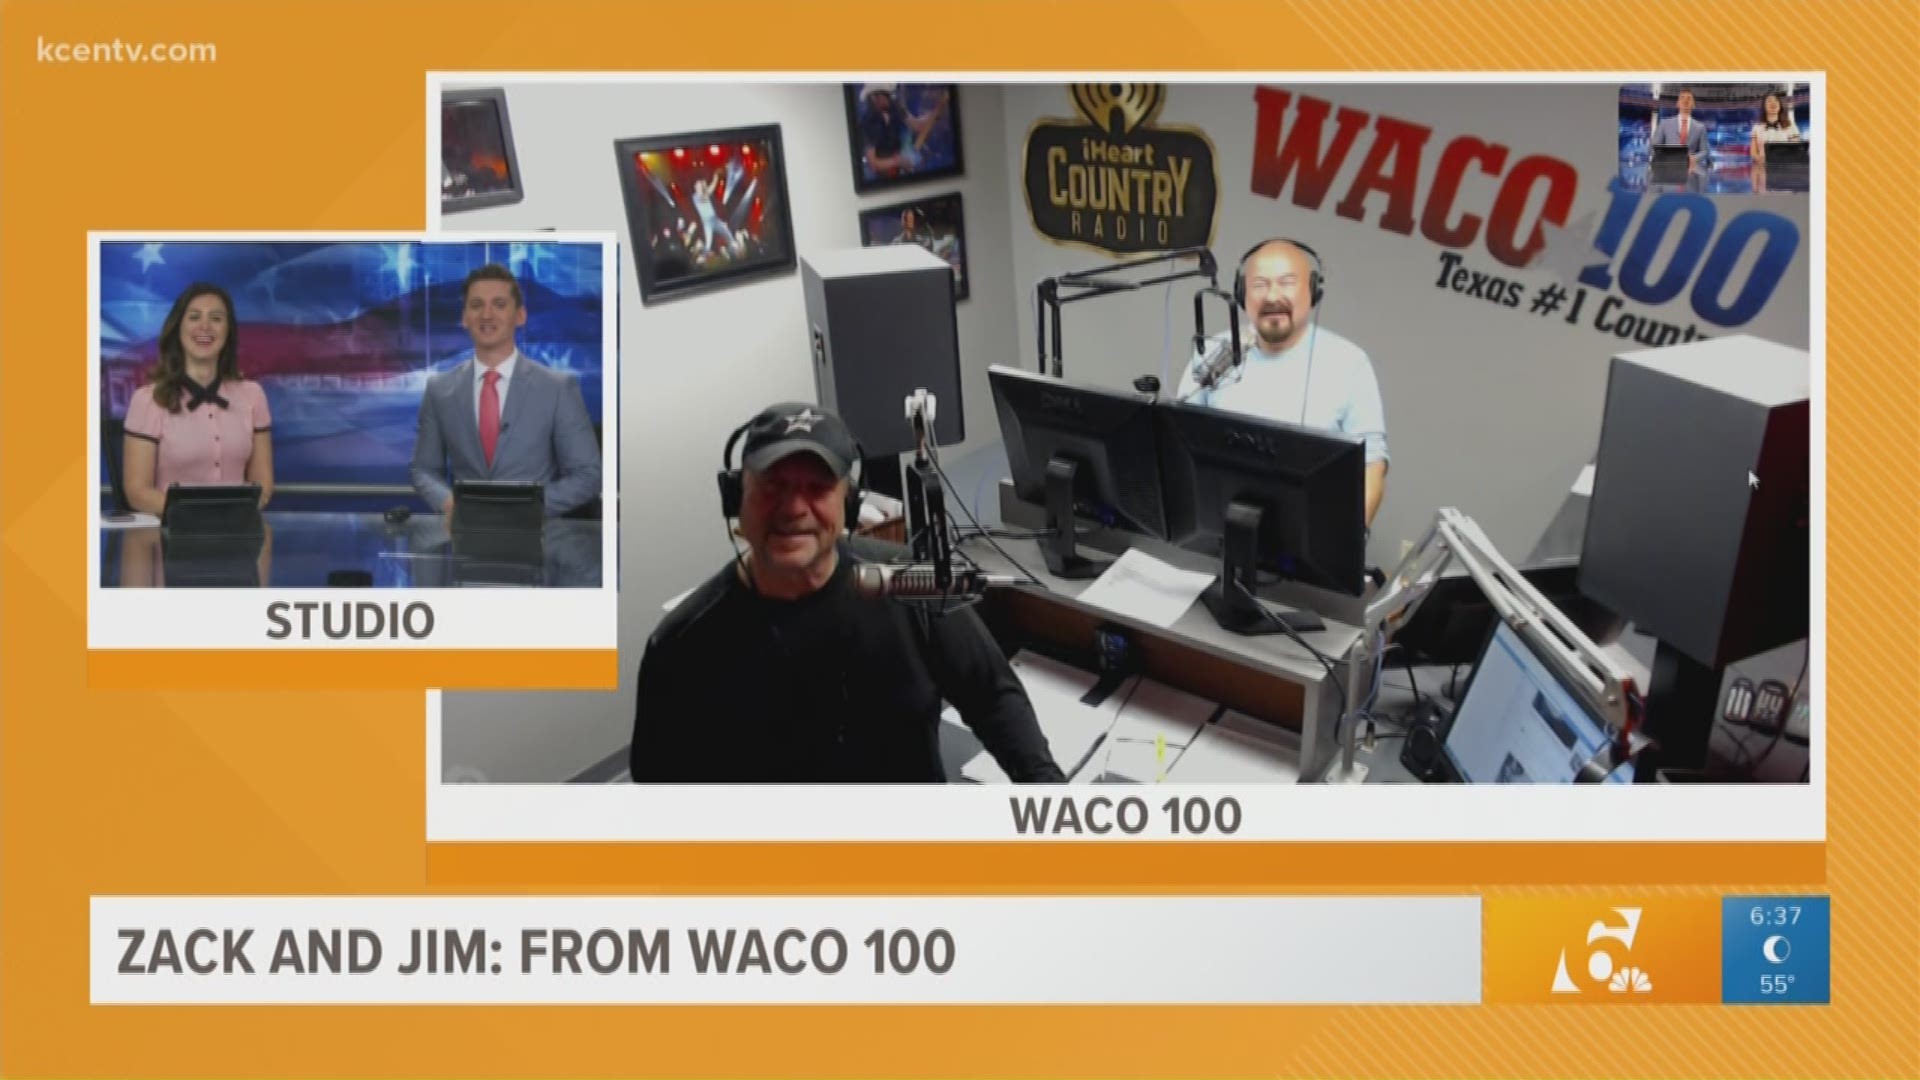 Zack & Jim from Waco 100 join Texas Today to talk Tiger Woods win at the 2019 Masters Tournament, and weekend plans.